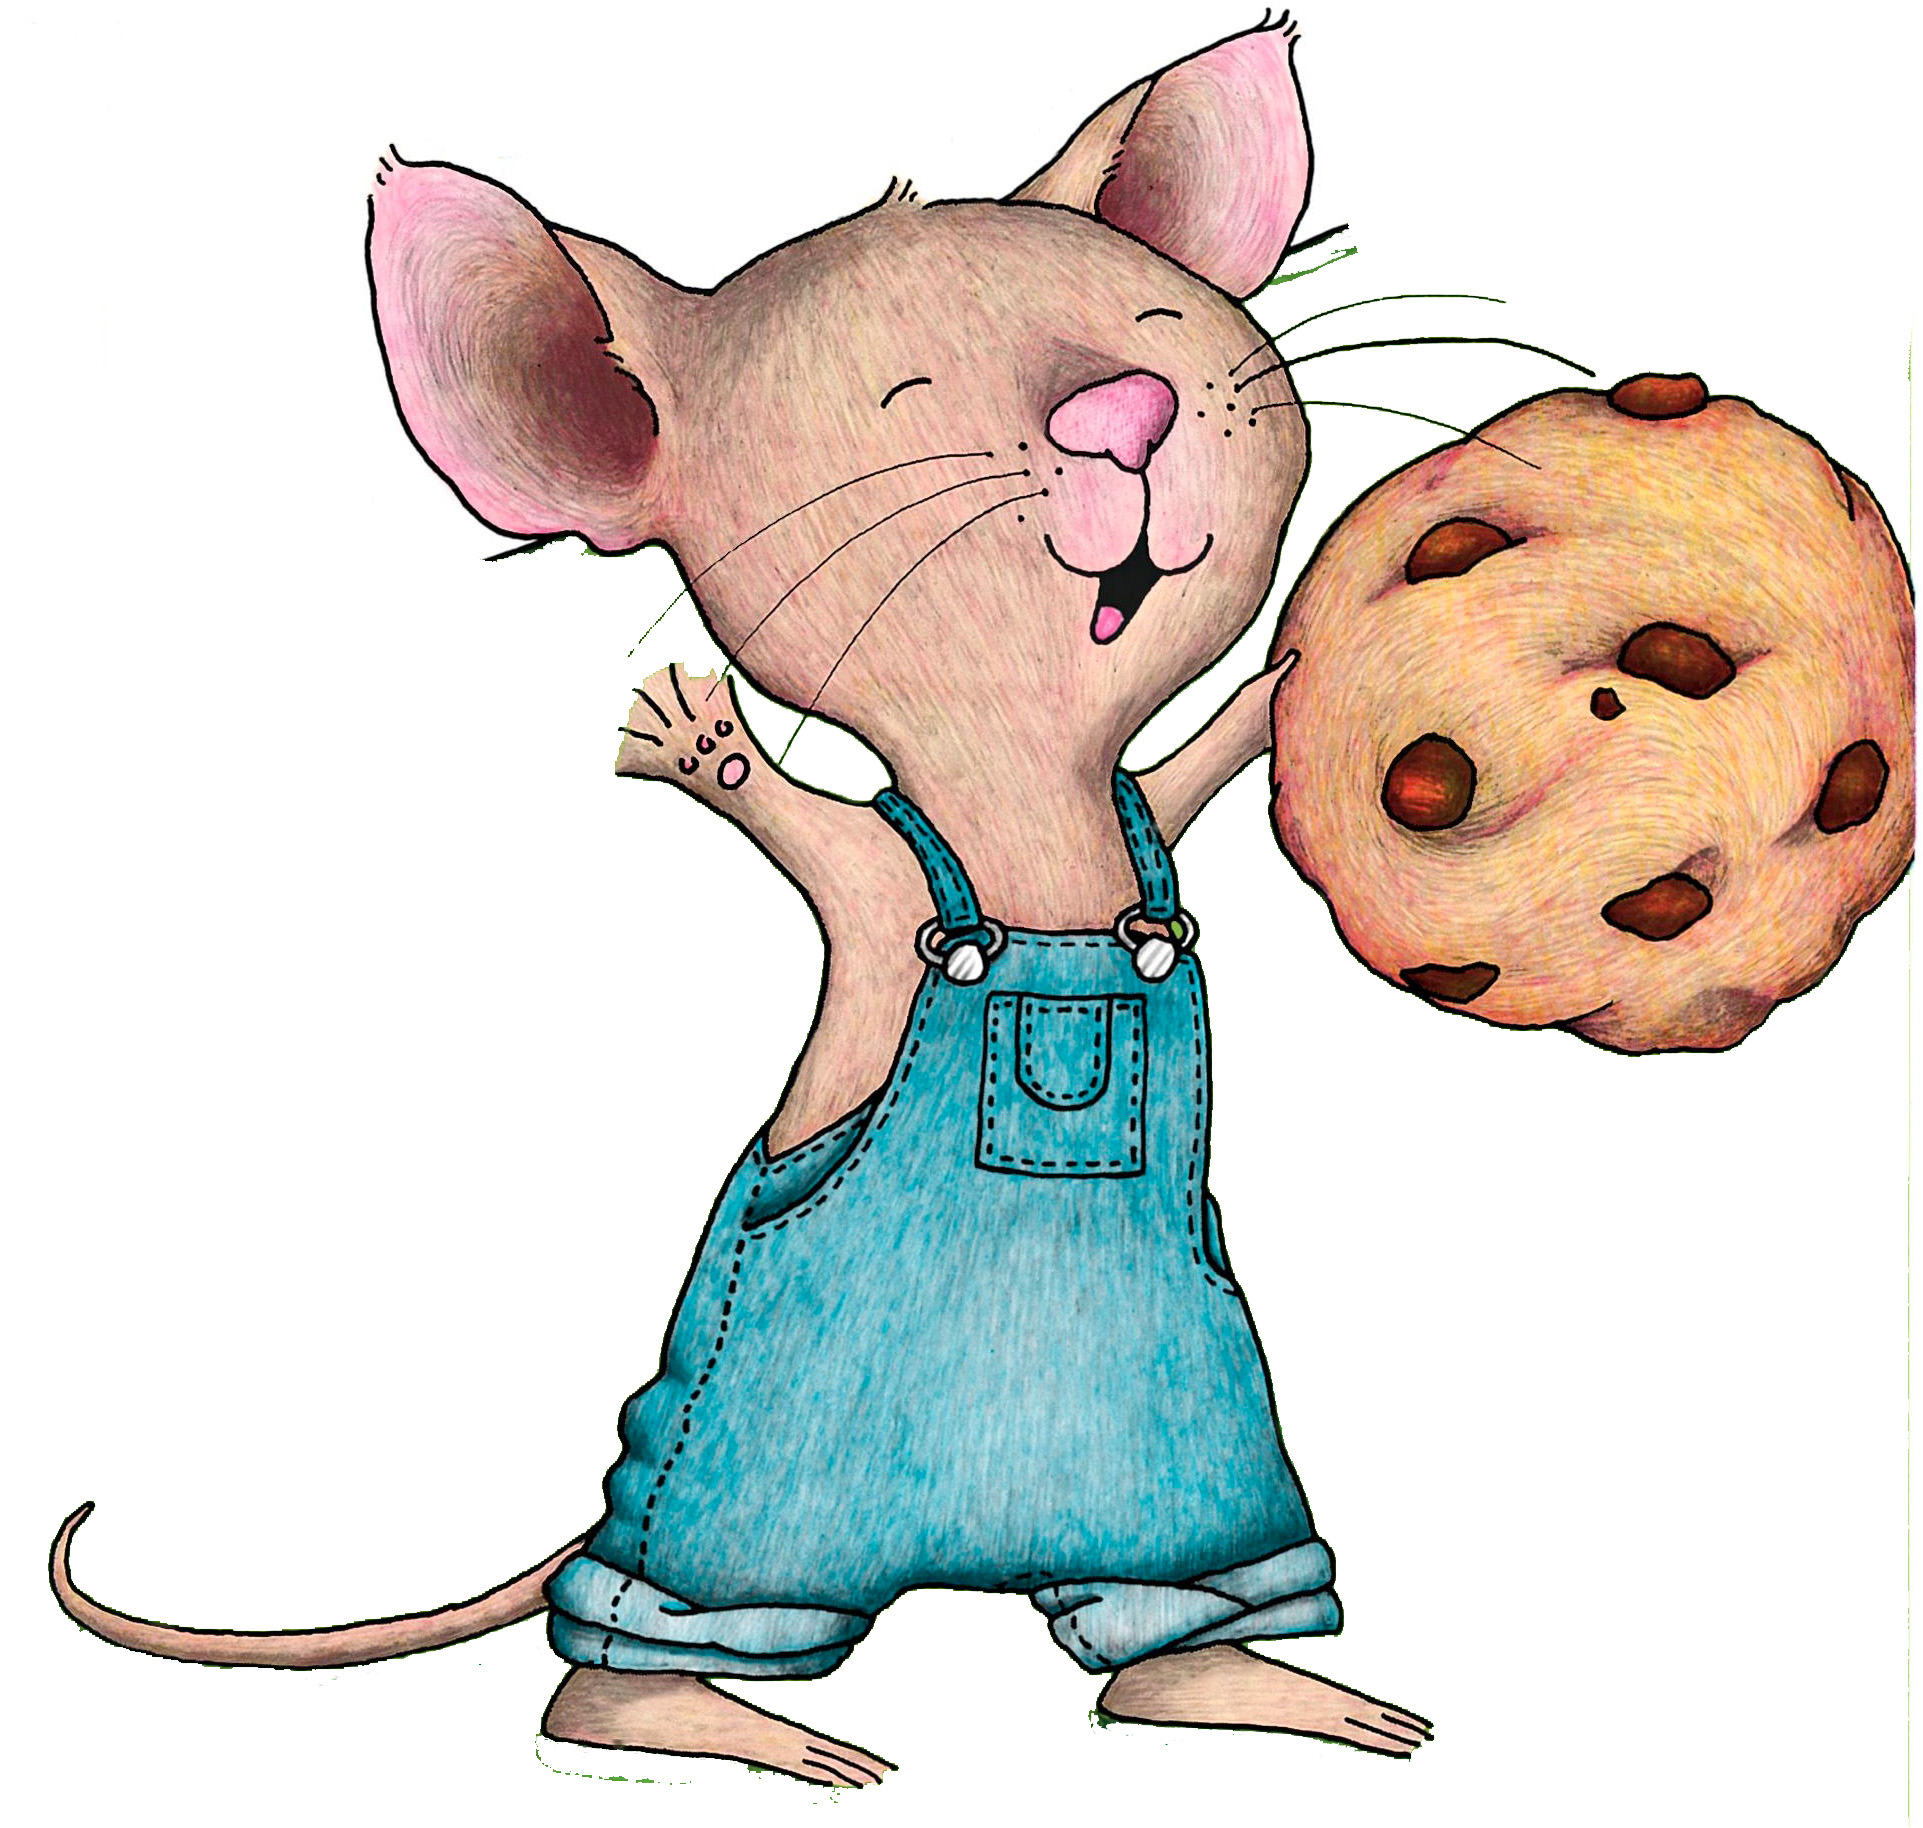 WHOLE TEAM - WHOLE COOKIE - #EveningWithKatyPerry : "IF YOU GIVE A MOUSE A COOKIE" IS NOT THE SOURCE OF INSPIRATION FOR THIS STORY. I AM SAYING THAT A MOUSE HAS ABILITIES TO FIND "HIDDEN COOKIES" FOR IT ALWAYS PLAYS THE RISKY CAT AND MOUSE GAME.